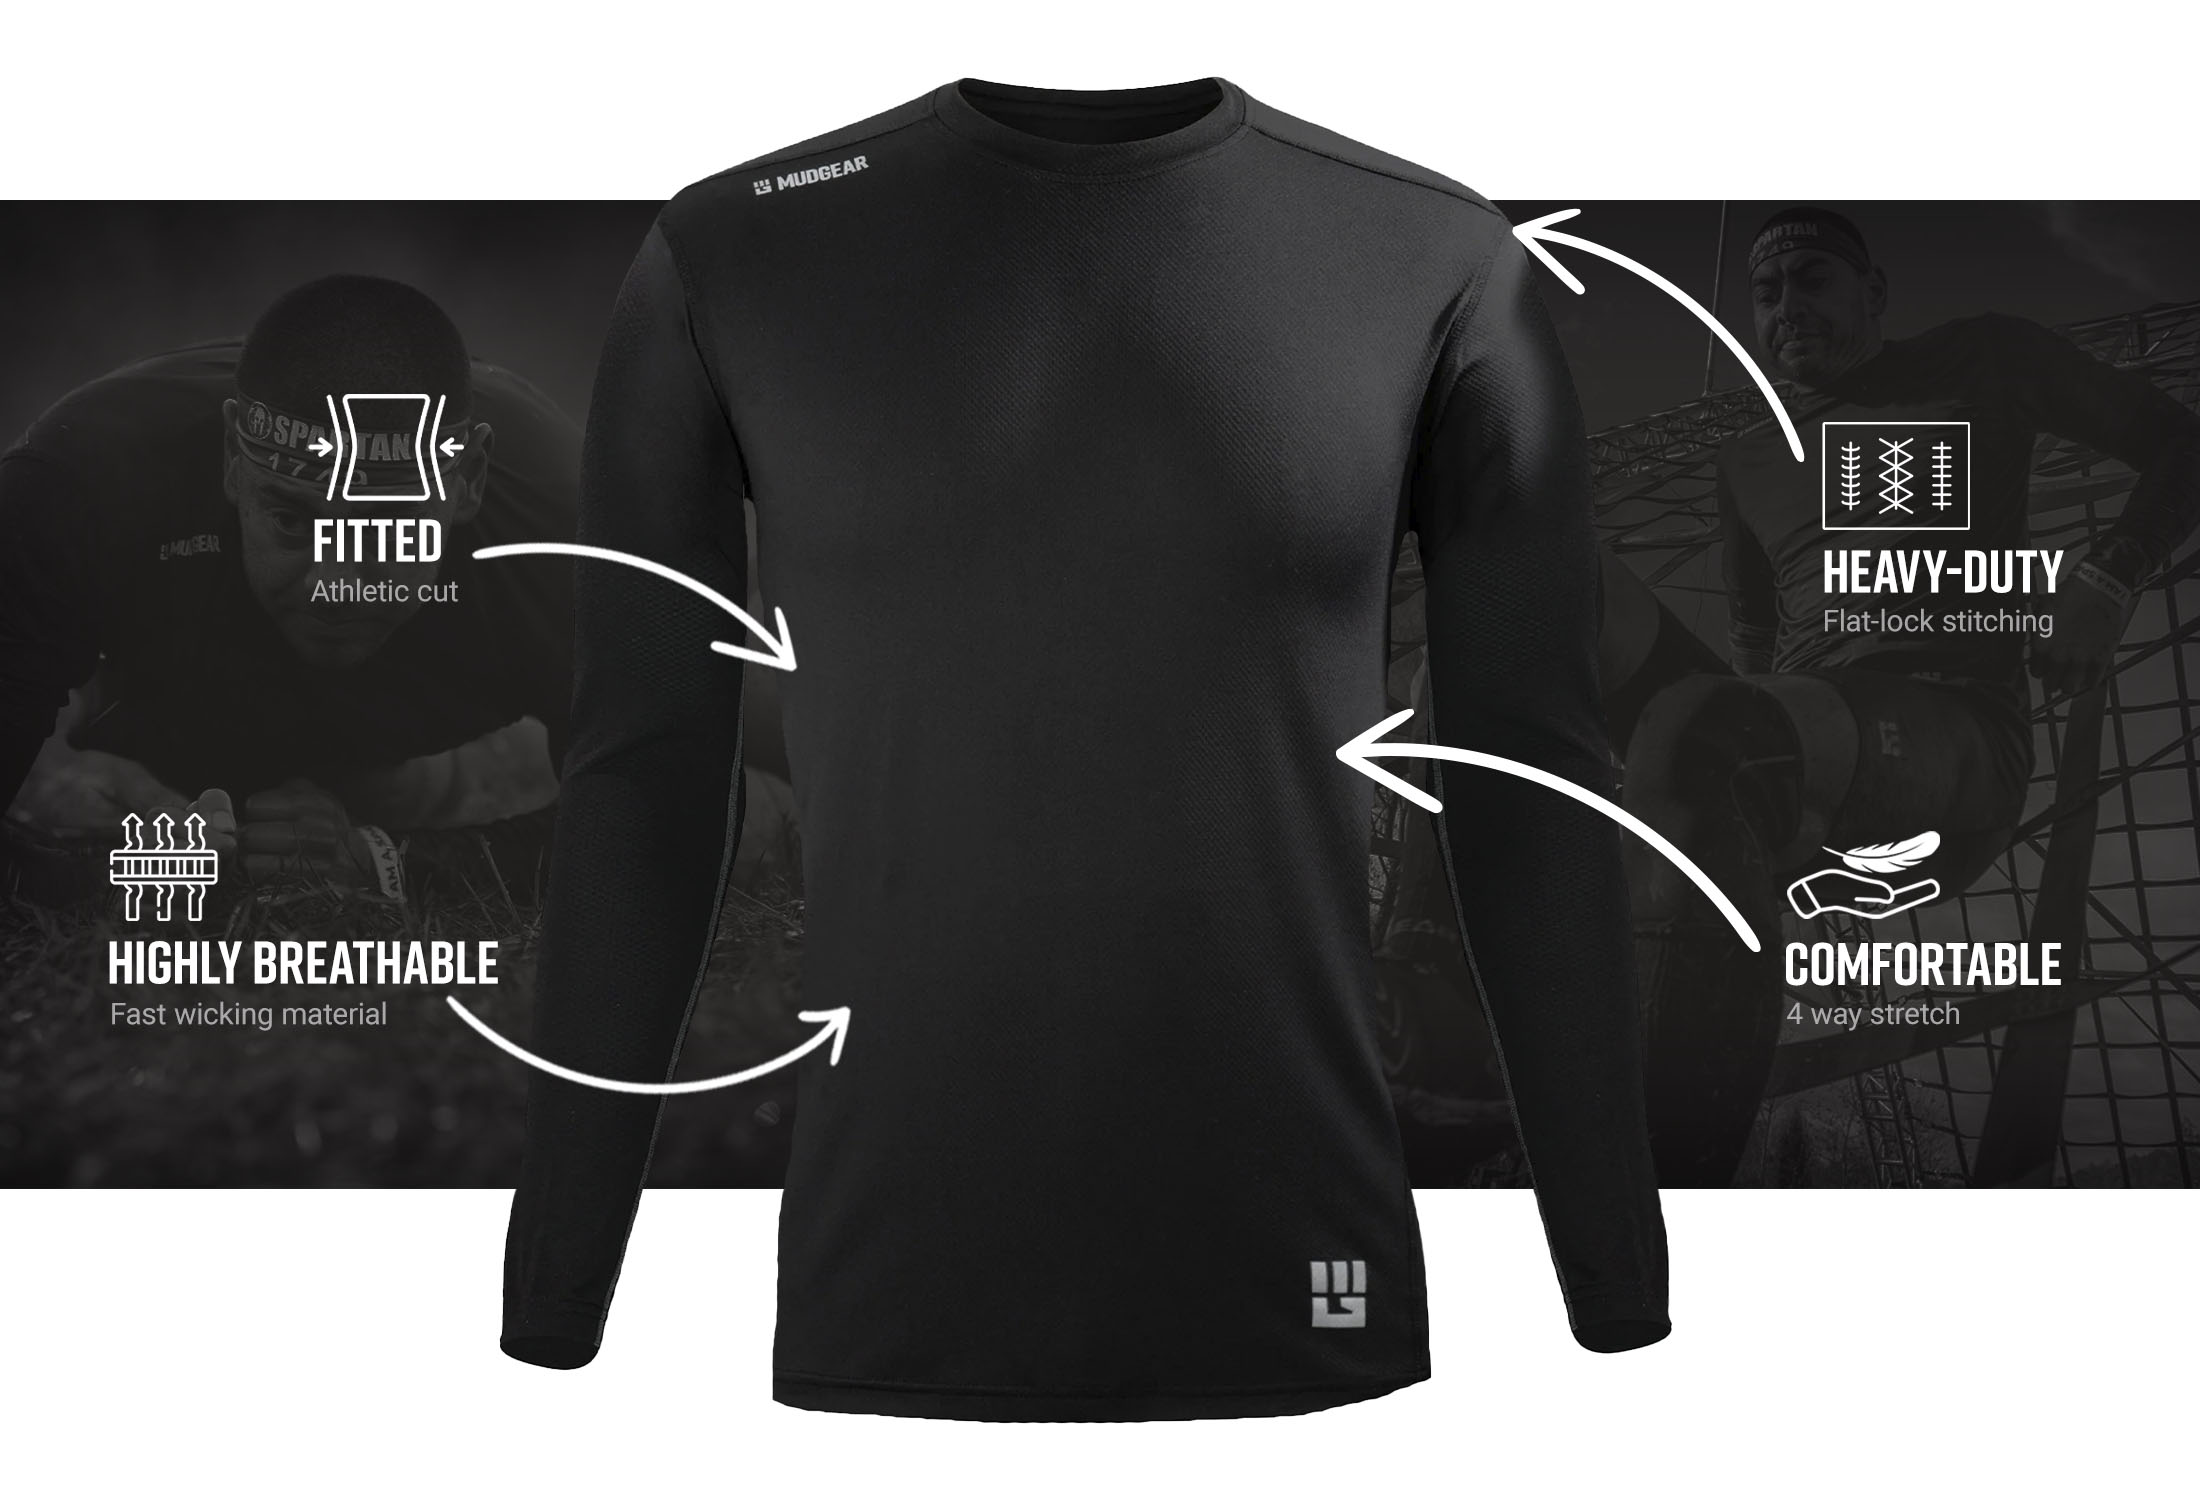 Infographic of Men's Fitted Performance Shirt VX - Long Sleeve (Black)